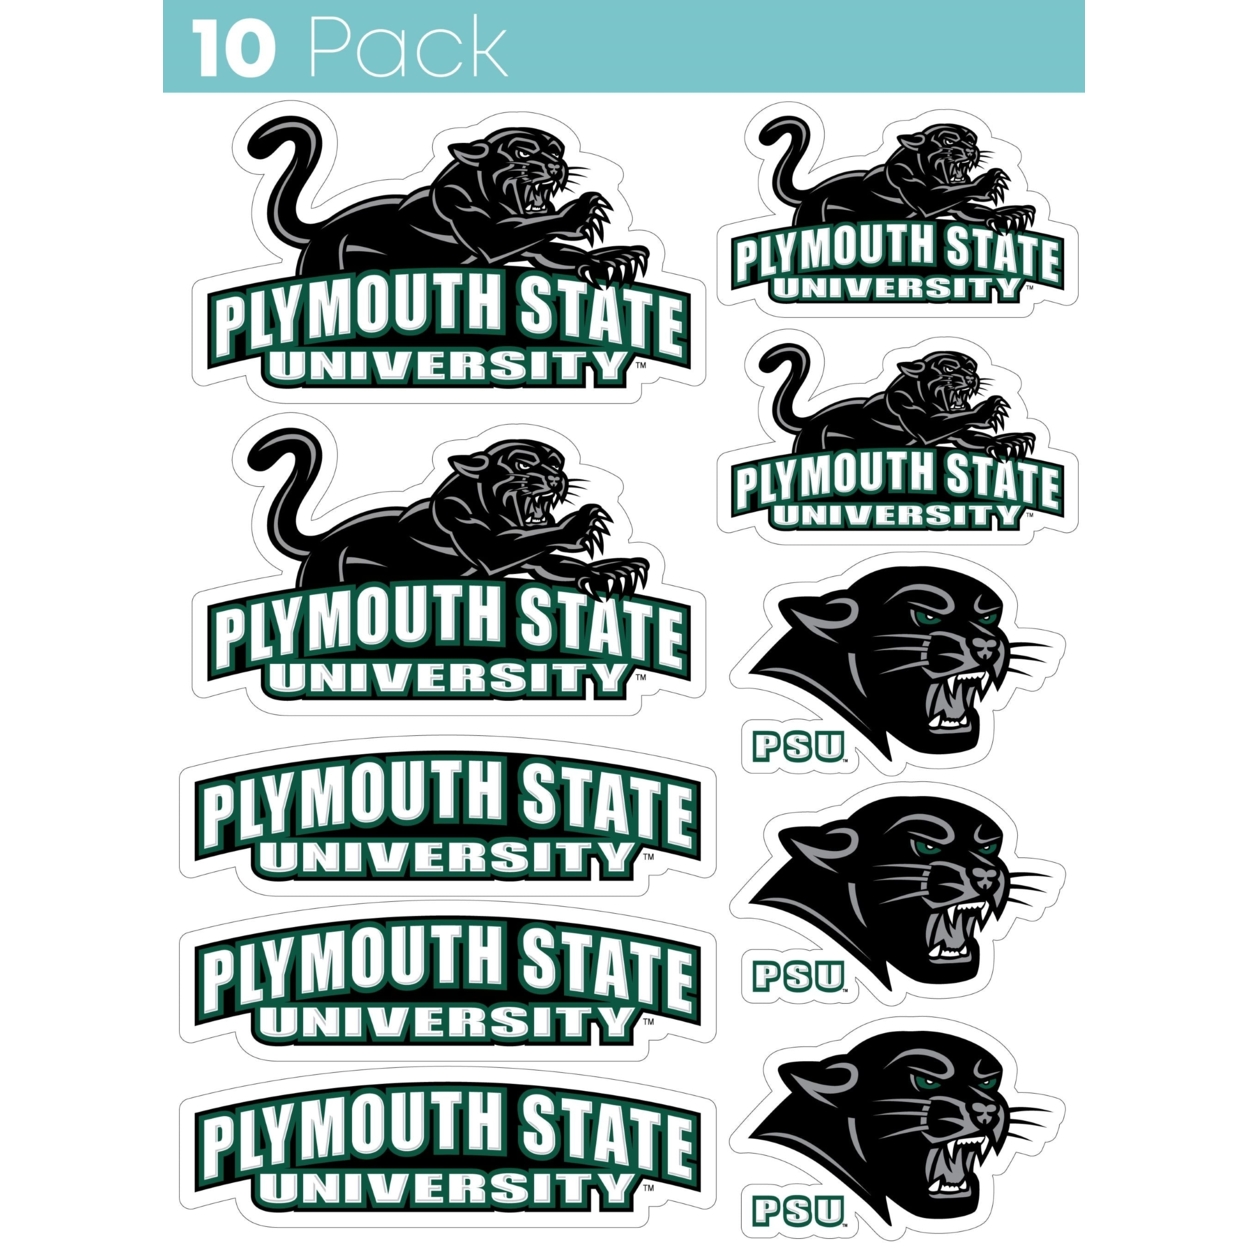 Plymouth State University 10 Pack Collegiate Vinyl Decal Sticker